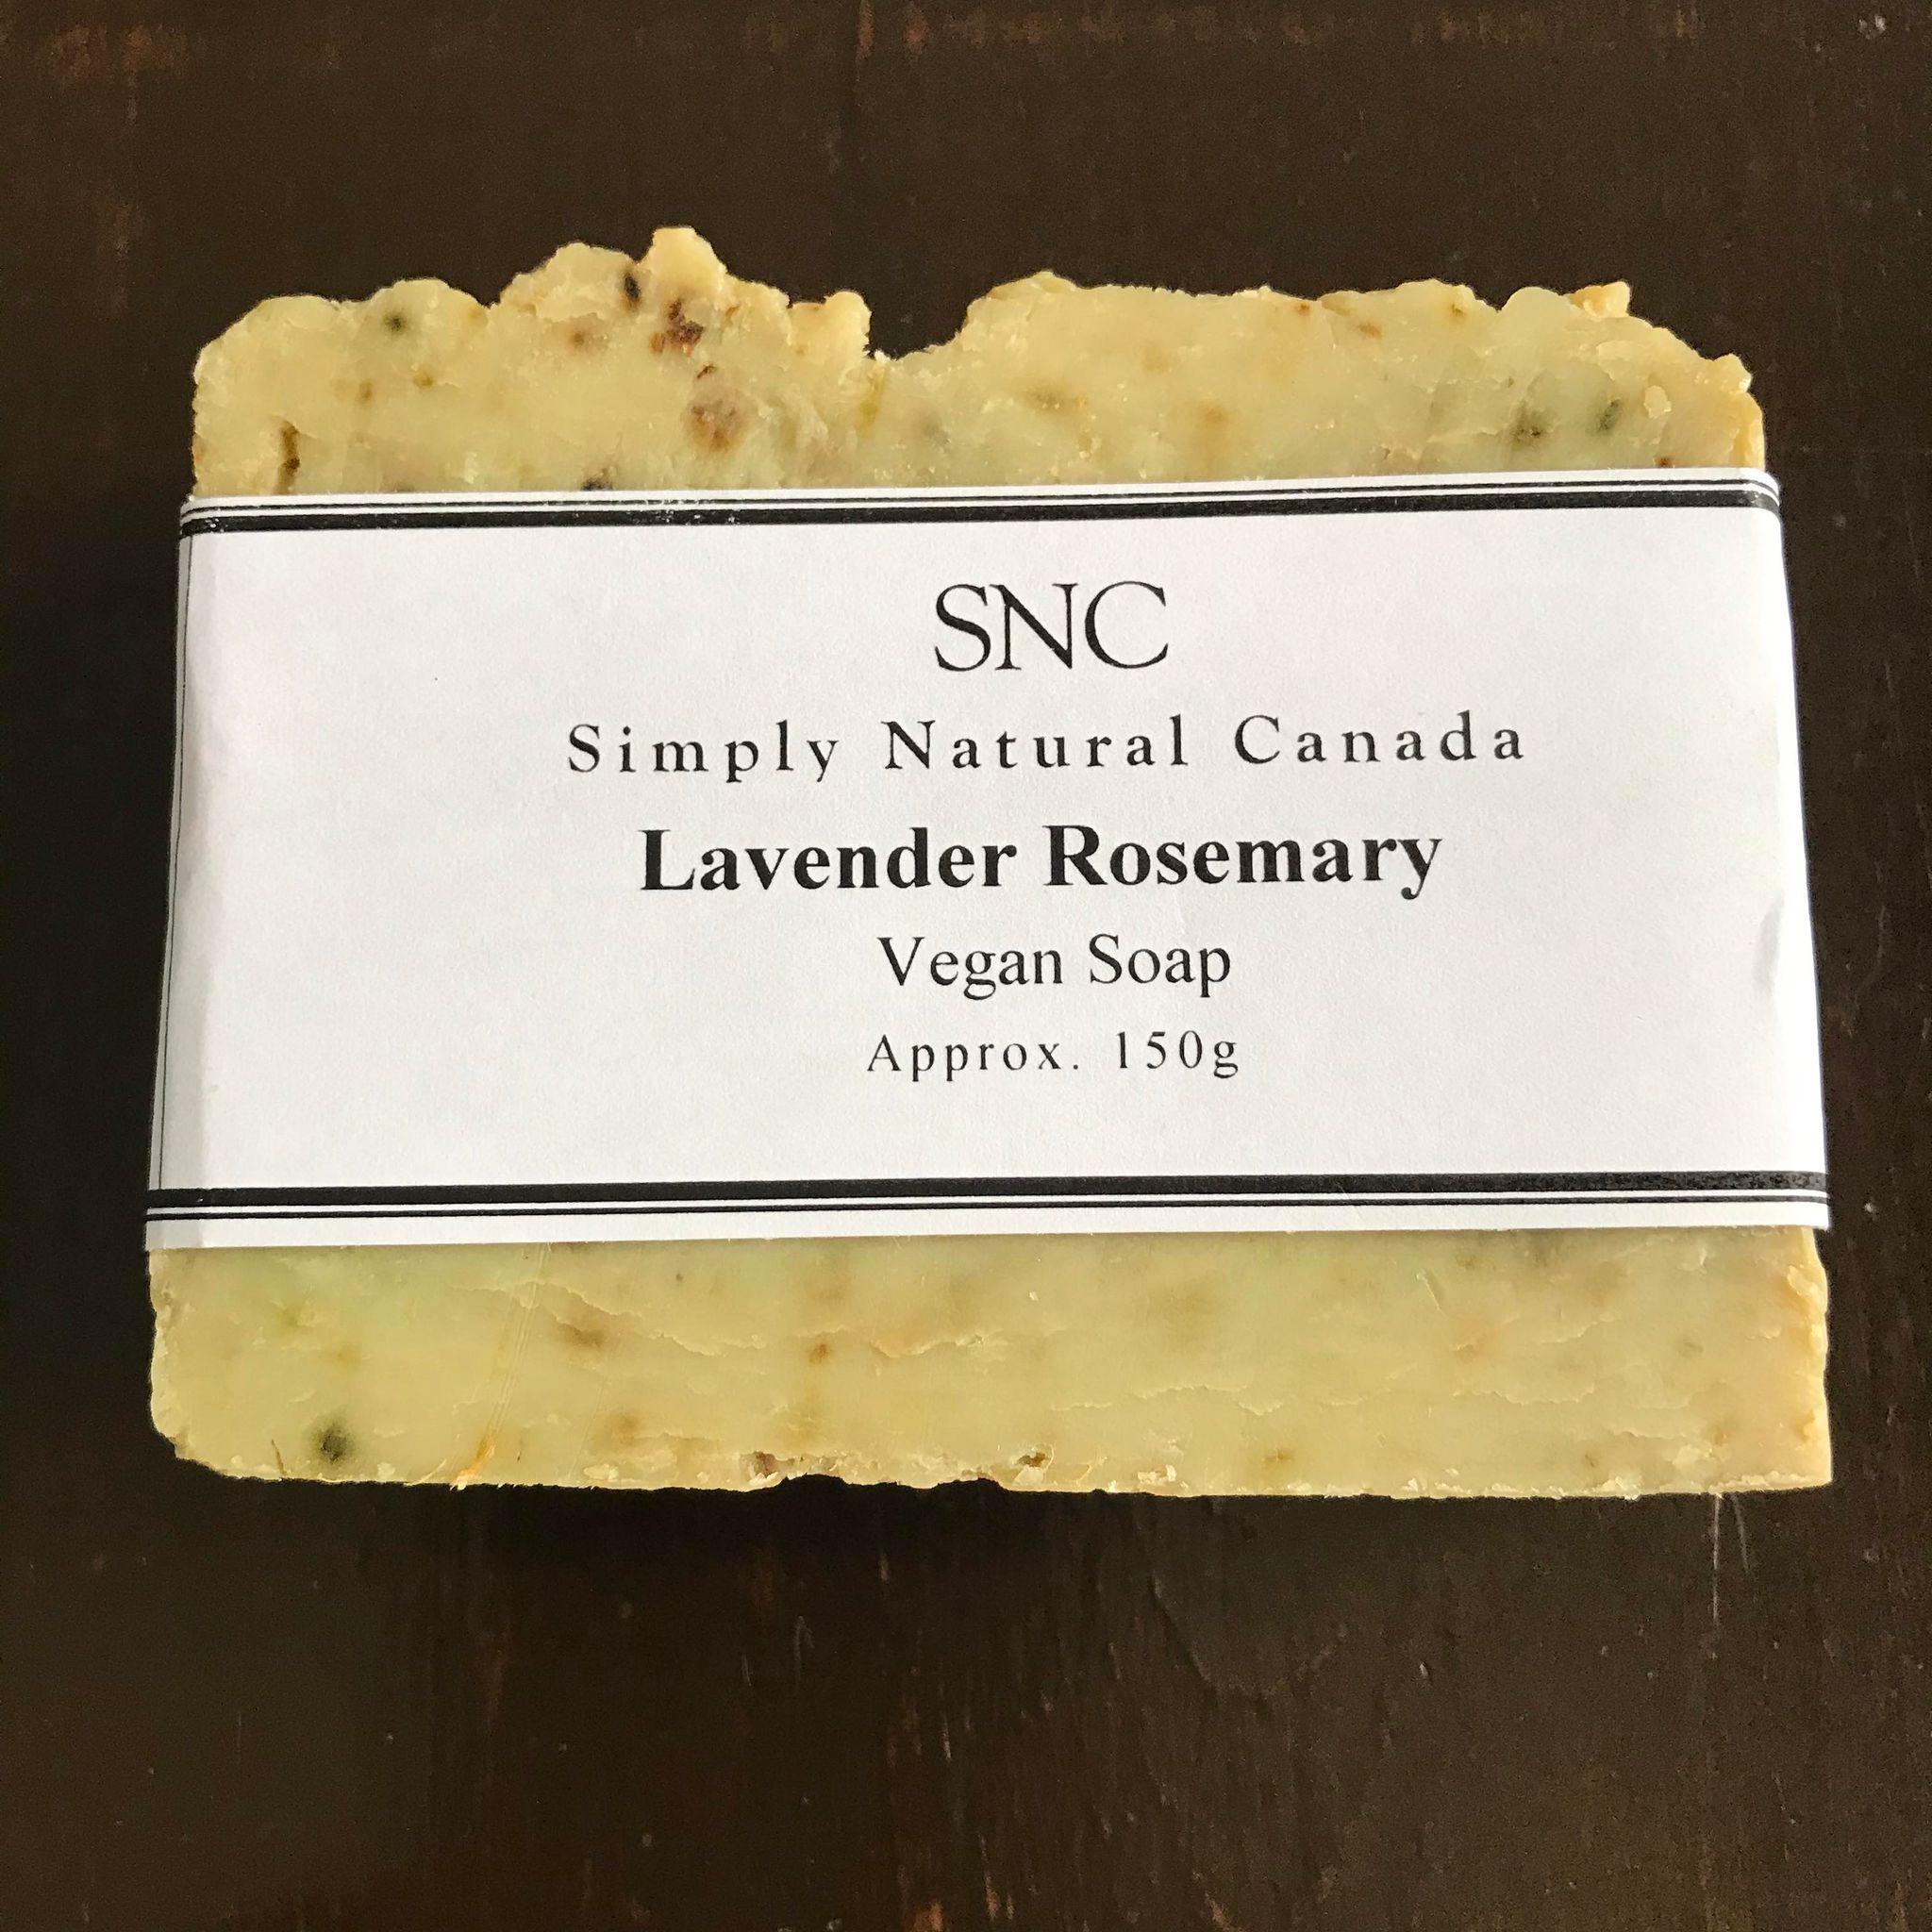 Lavender rosemary rectangle vegan soap made in Canada by Simply Natural Canada